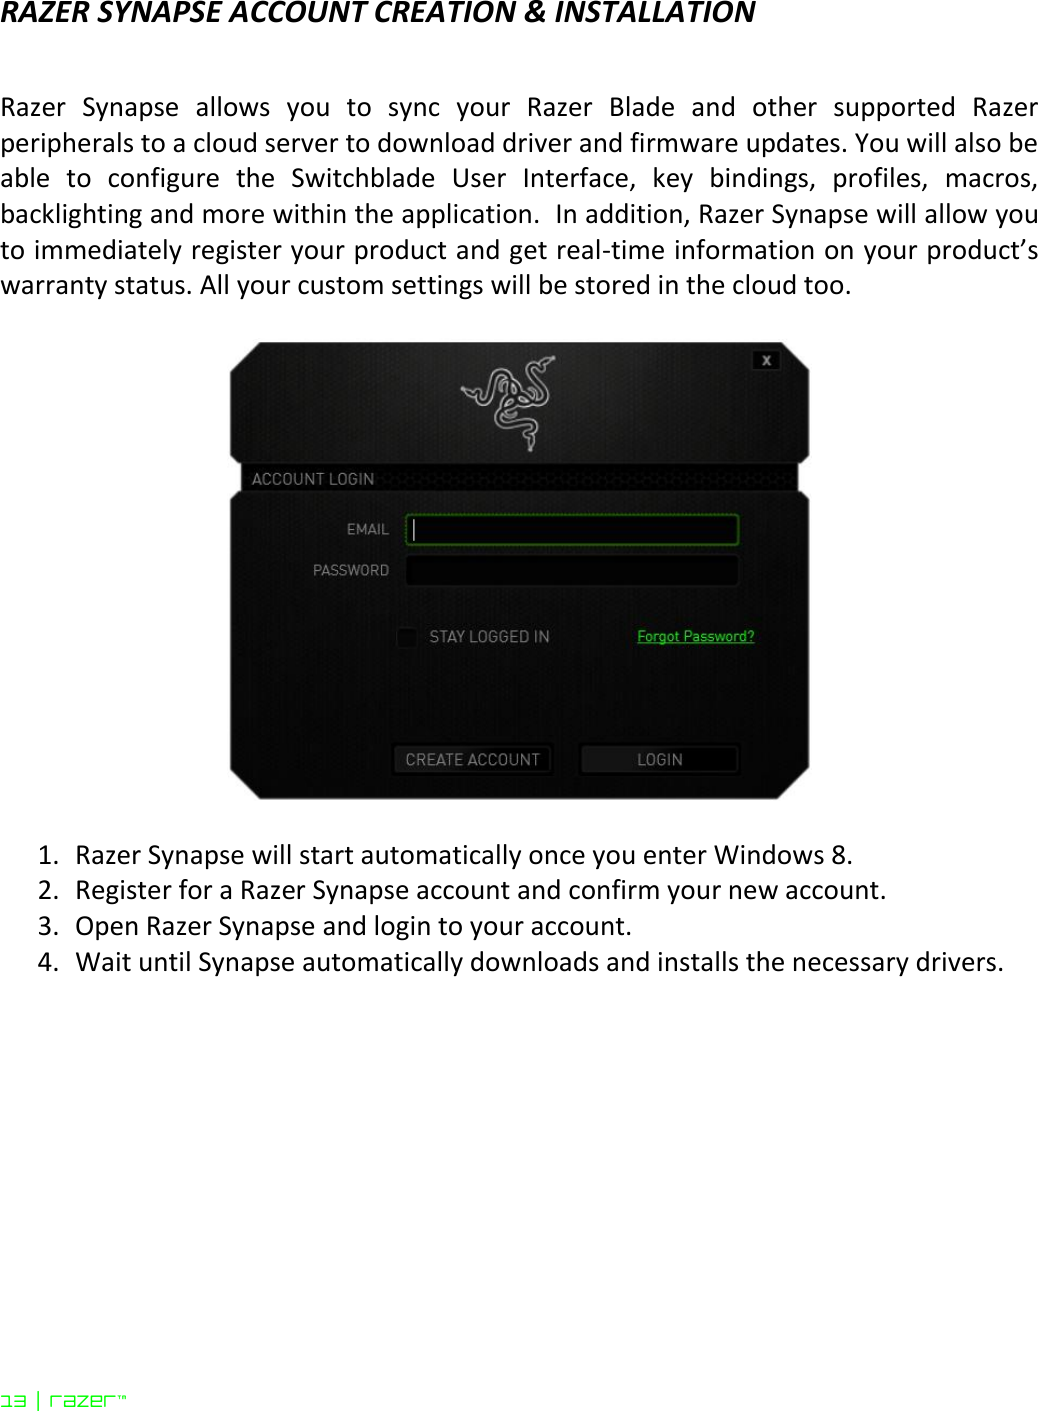 13 | razer™  RAZER SYNAPSE ACCOUNT CREATION &amp; INSTALLATION   Razer  Synapse  allows  you  to  sync  your  Razer  Blade  and  other  supported  Razer peripherals to a cloud server to download driver and firmware updates. You will also be able  to  configure  the  Switchblade  User  Interface,  key  bindings,  profiles,  macros, backlighting and more within the application.  In addition, Razer Synapse will allow you to immediately register your product and get real-time information on your product’s warranty status. All your custom settings will be stored in the cloud too.      1. Razer Synapse will start automatically once you enter Windows 8. 2. Register for a Razer Synapse account and confirm your new account.  3. Open Razer Synapse and login to your account.  4. Wait until Synapse automatically downloads and installs the necessary drivers.   